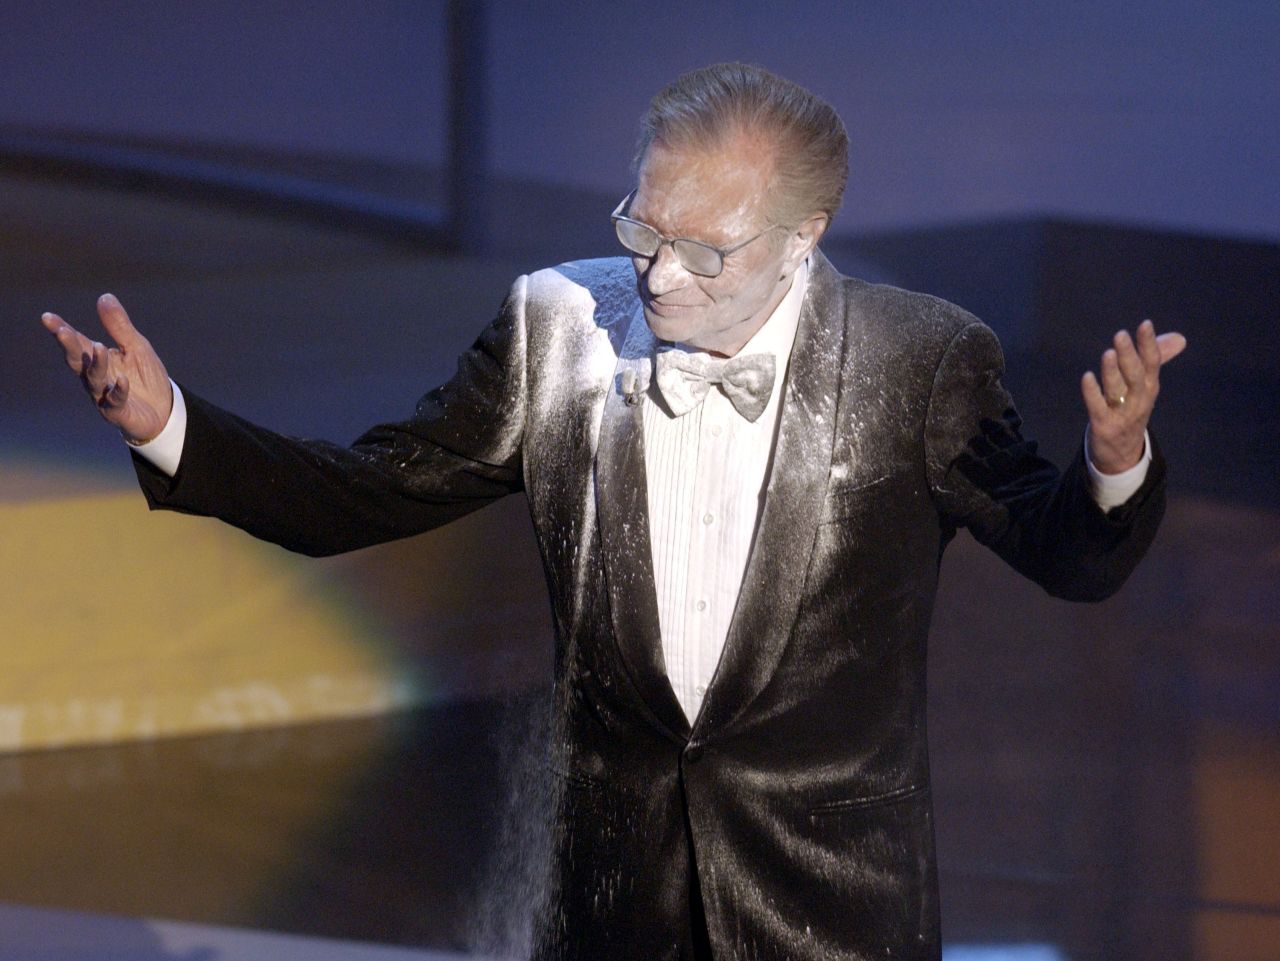 King gets a little too much powder during a bit at the Emmy Awards in 2002.